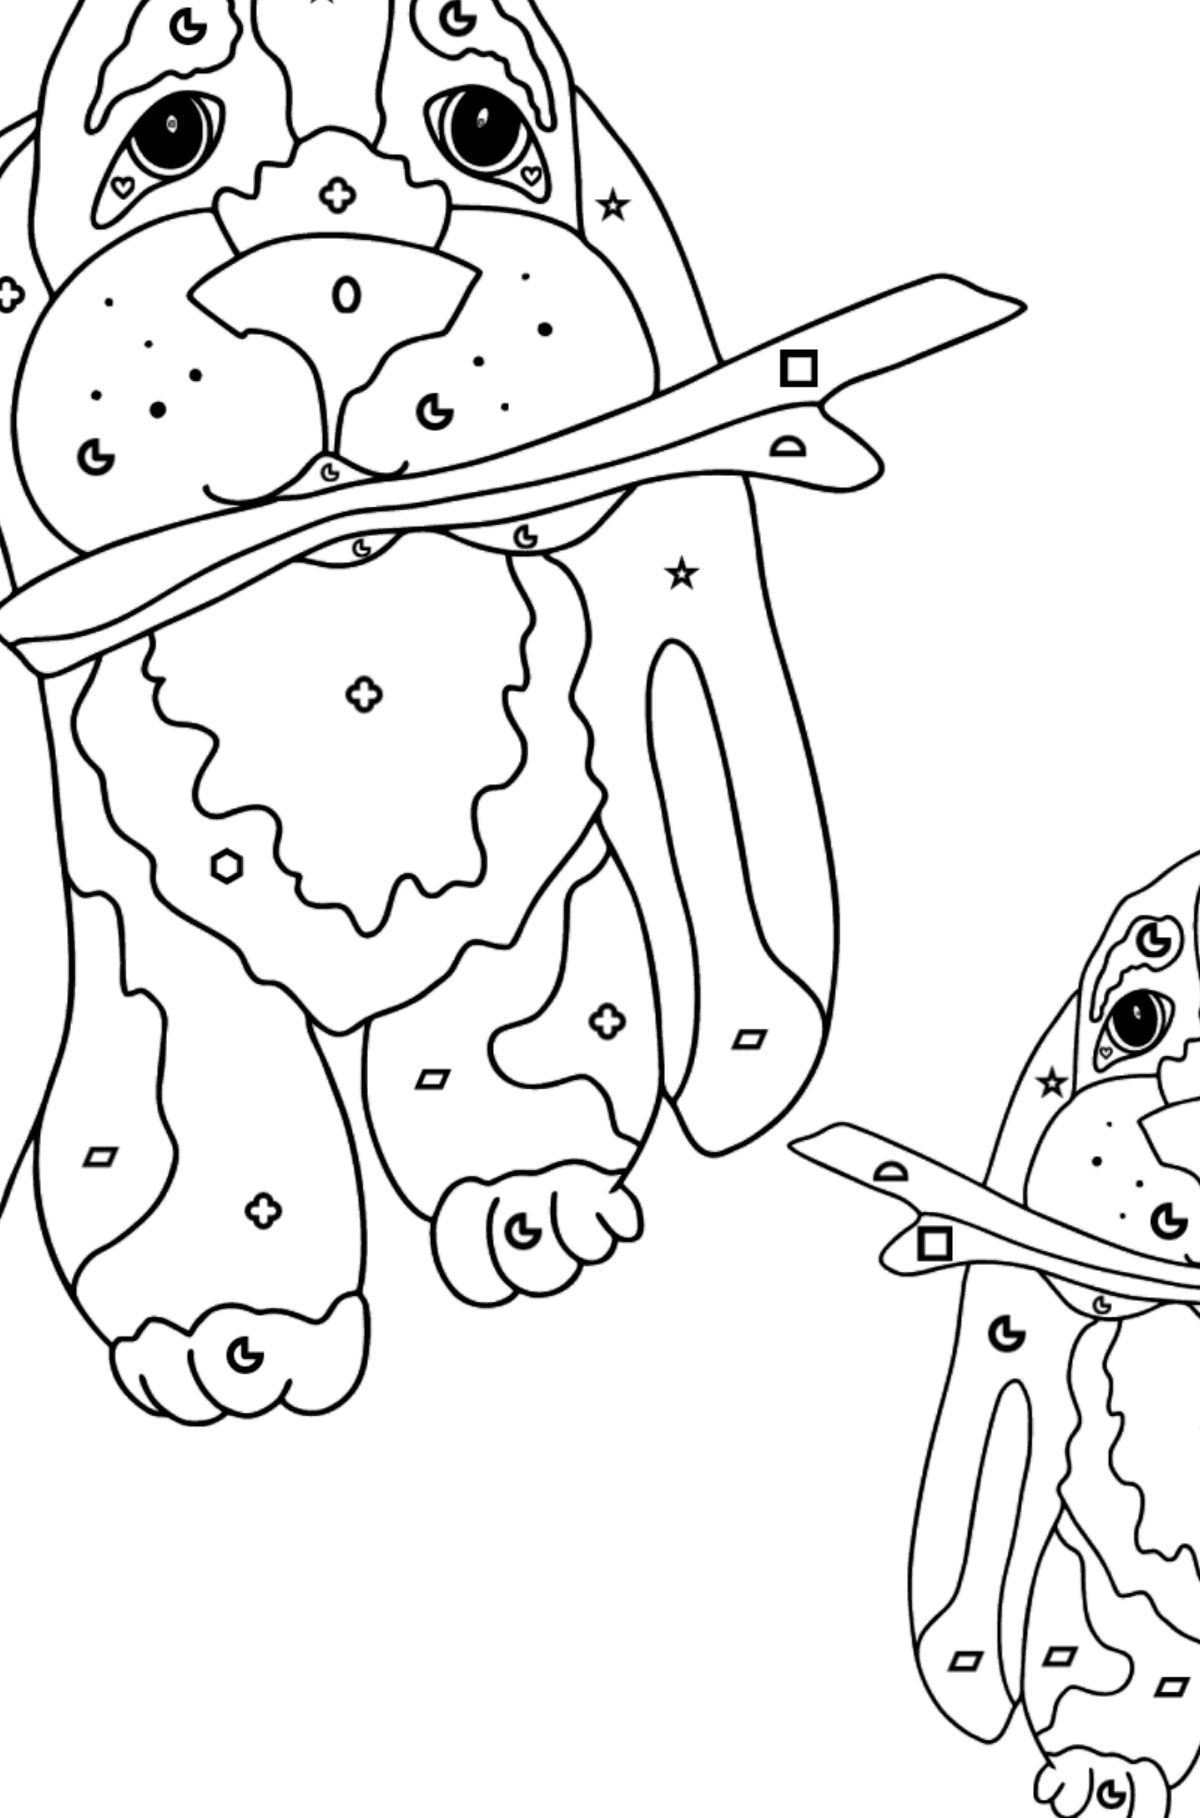 Coloring Page - Two Dogs are Playing with Sticks - Coloring by Symbols and Geometric Shapes for Kids